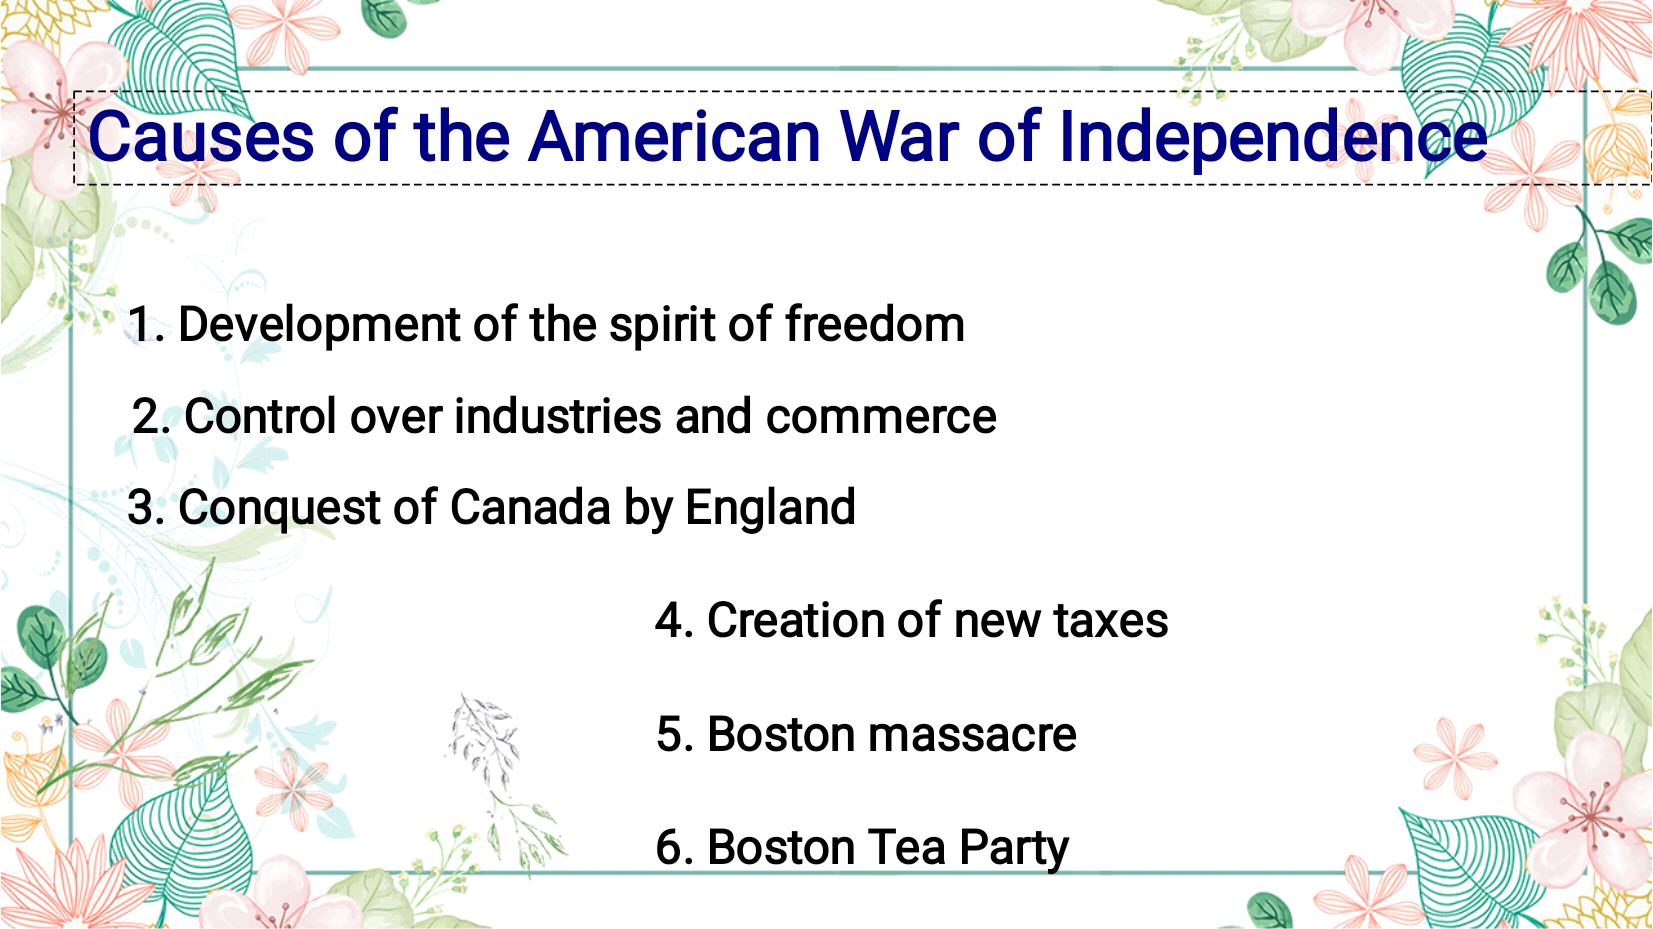 Causes of American War of Independence